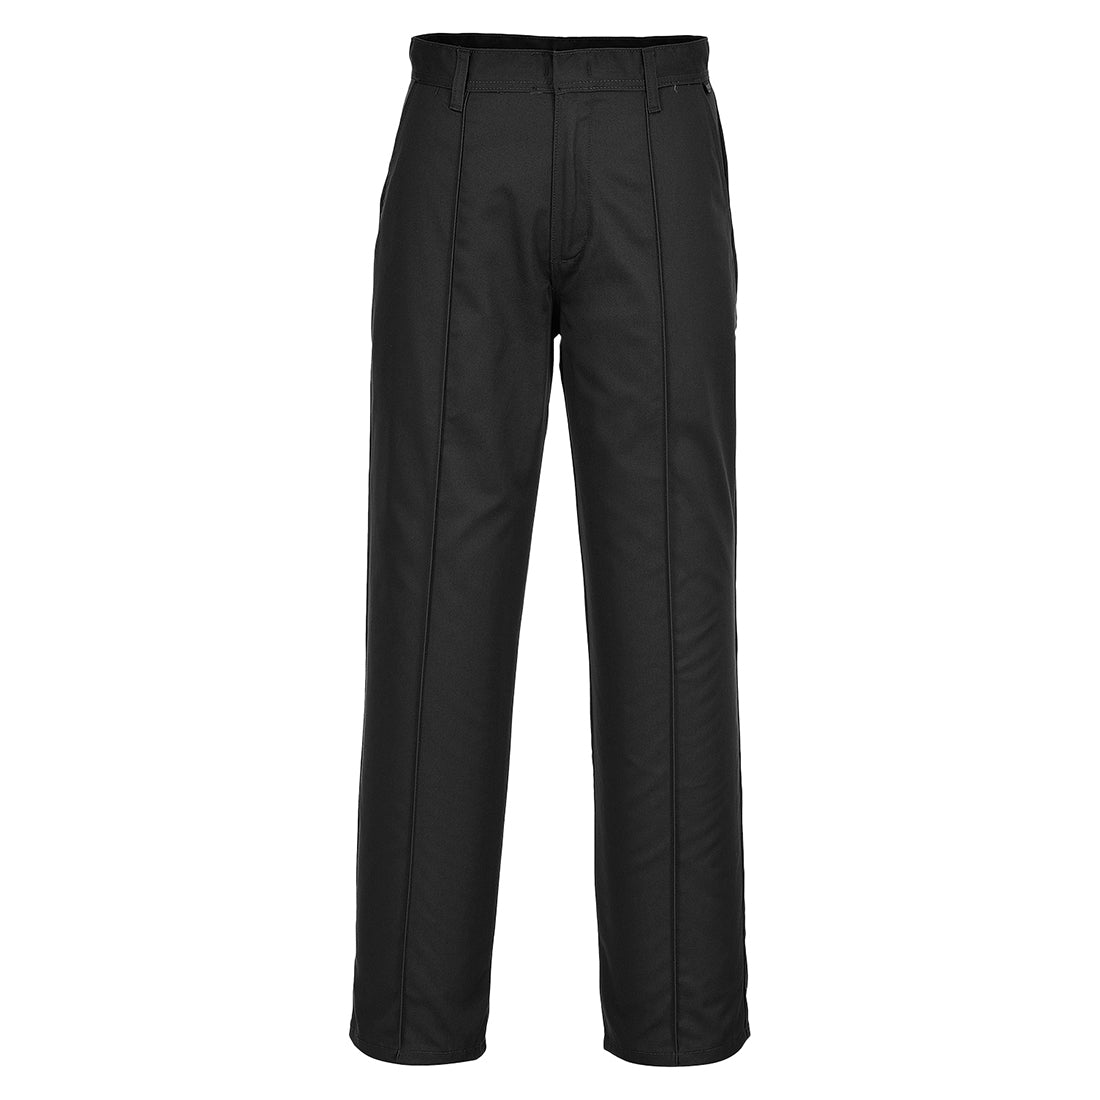 Portwest 2885 - Black Preston Mens Work Trousers with Side Pockets sz 34" Tall